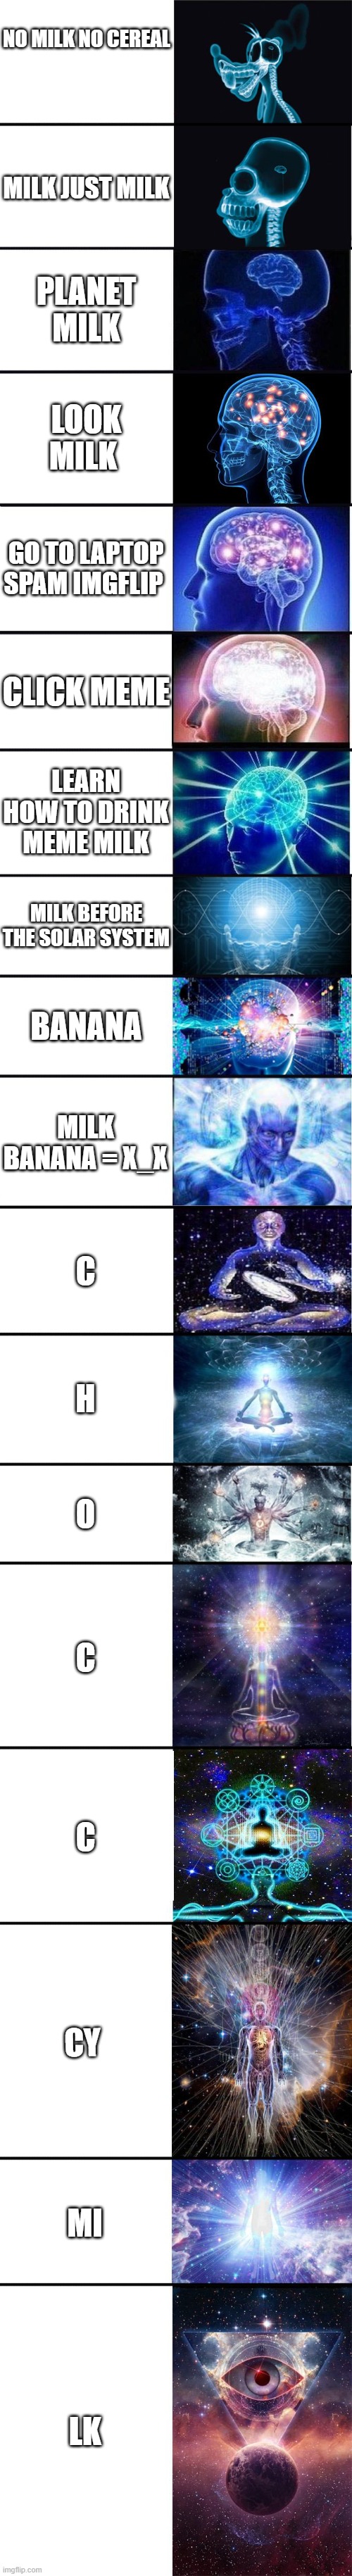 expanding brain: 9001 |  NO MILK NO CEREAL; MILK JUST MILK; PLANET MILK; LOOK MILK; GO TO LAPTOP SPAM IMGFLIP; CLICK MEME; LEARN HOW TO DRINK MEME MILK; MILK BEFORE THE SOLAR SYSTEM; BANANA; MILK BANANA = X_X; C; H; O; C; C; CY; MI; LK | image tagged in expanding brain 9001 | made w/ Imgflip meme maker